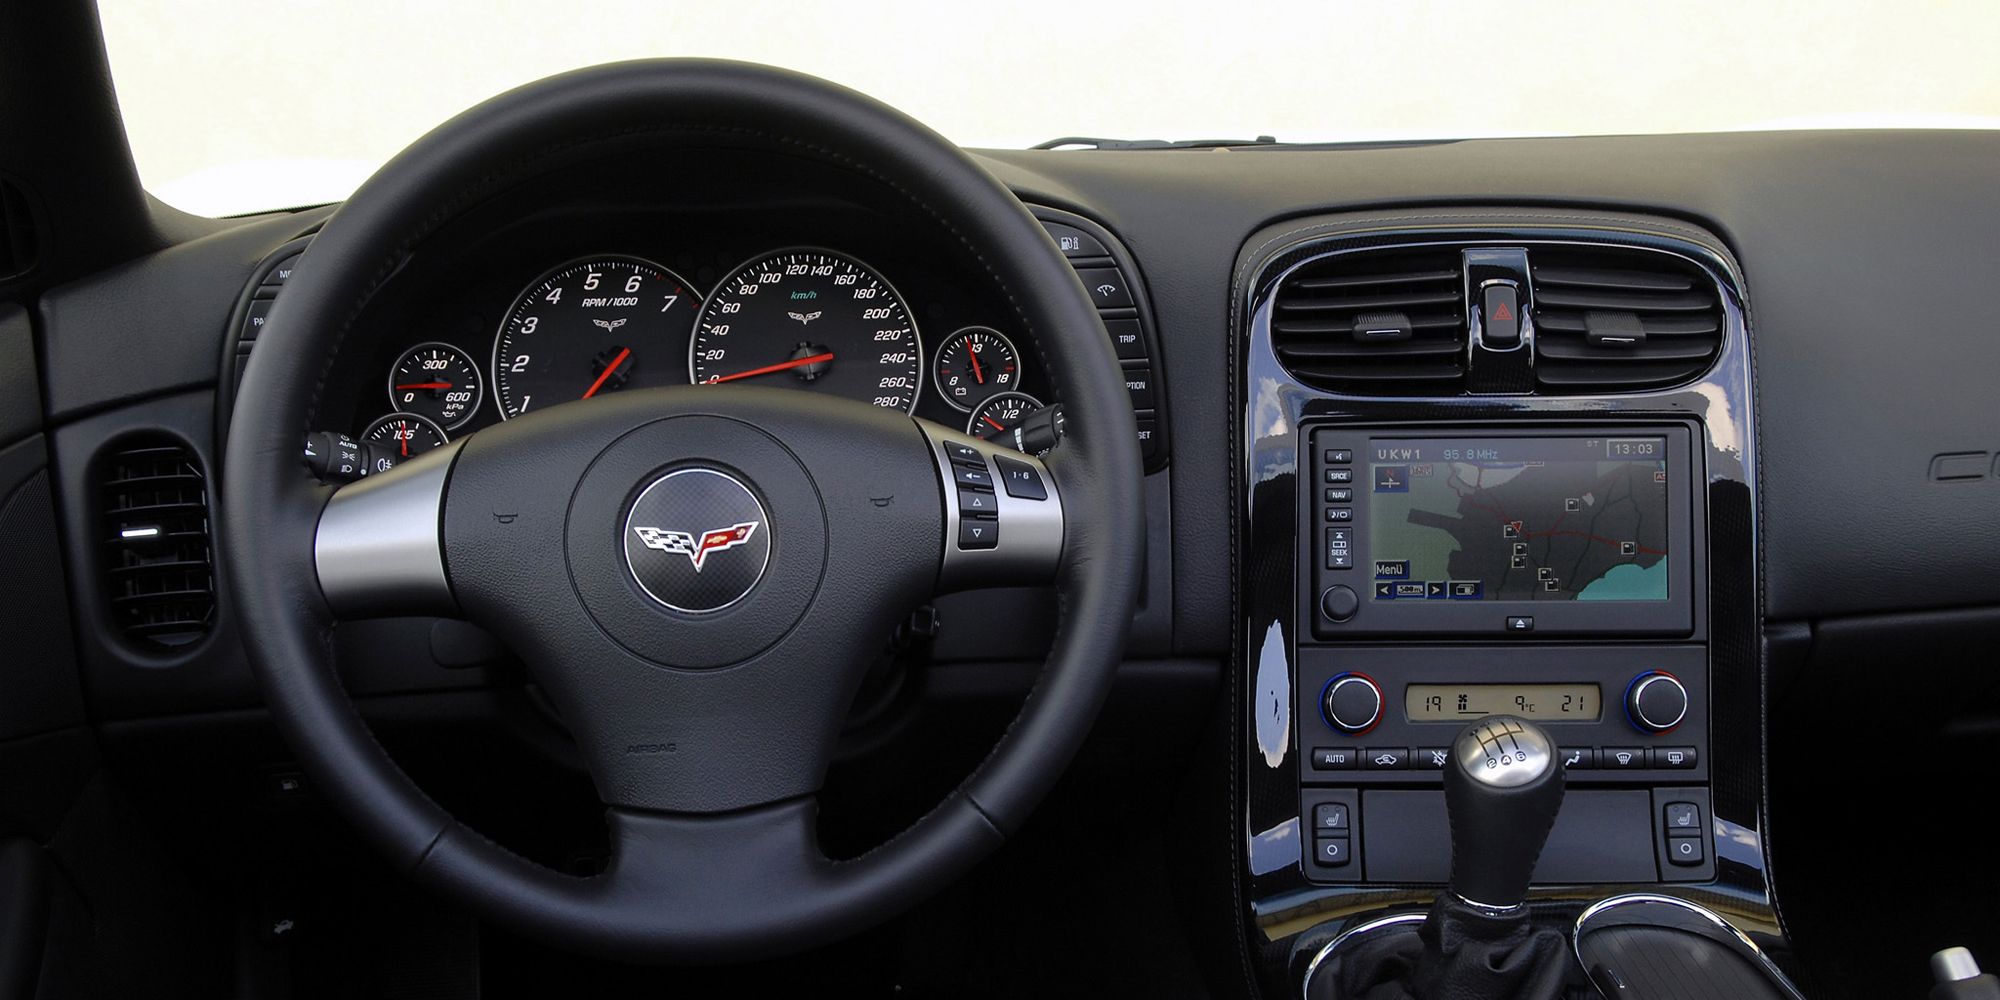 The interior of the C6 Corvette, from the driver's seat